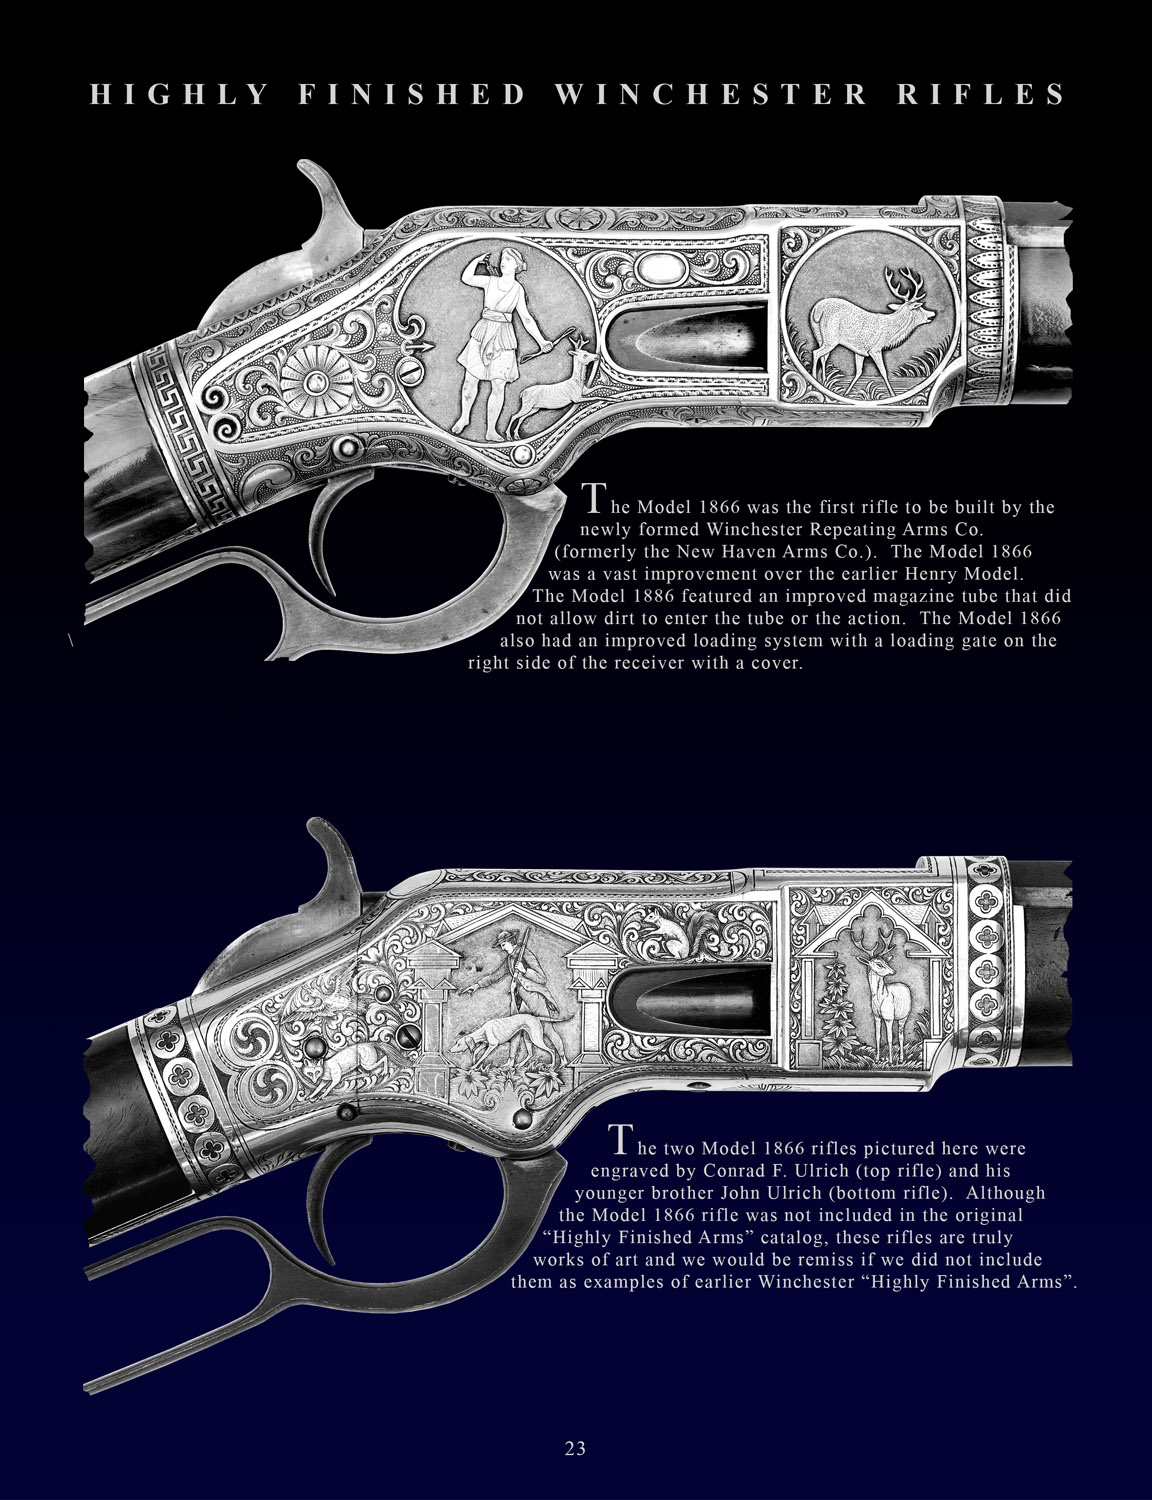 Page from the Winchester Highly Finished Firearms catalog, by Turnbull Restoration of Bloomfield, NY